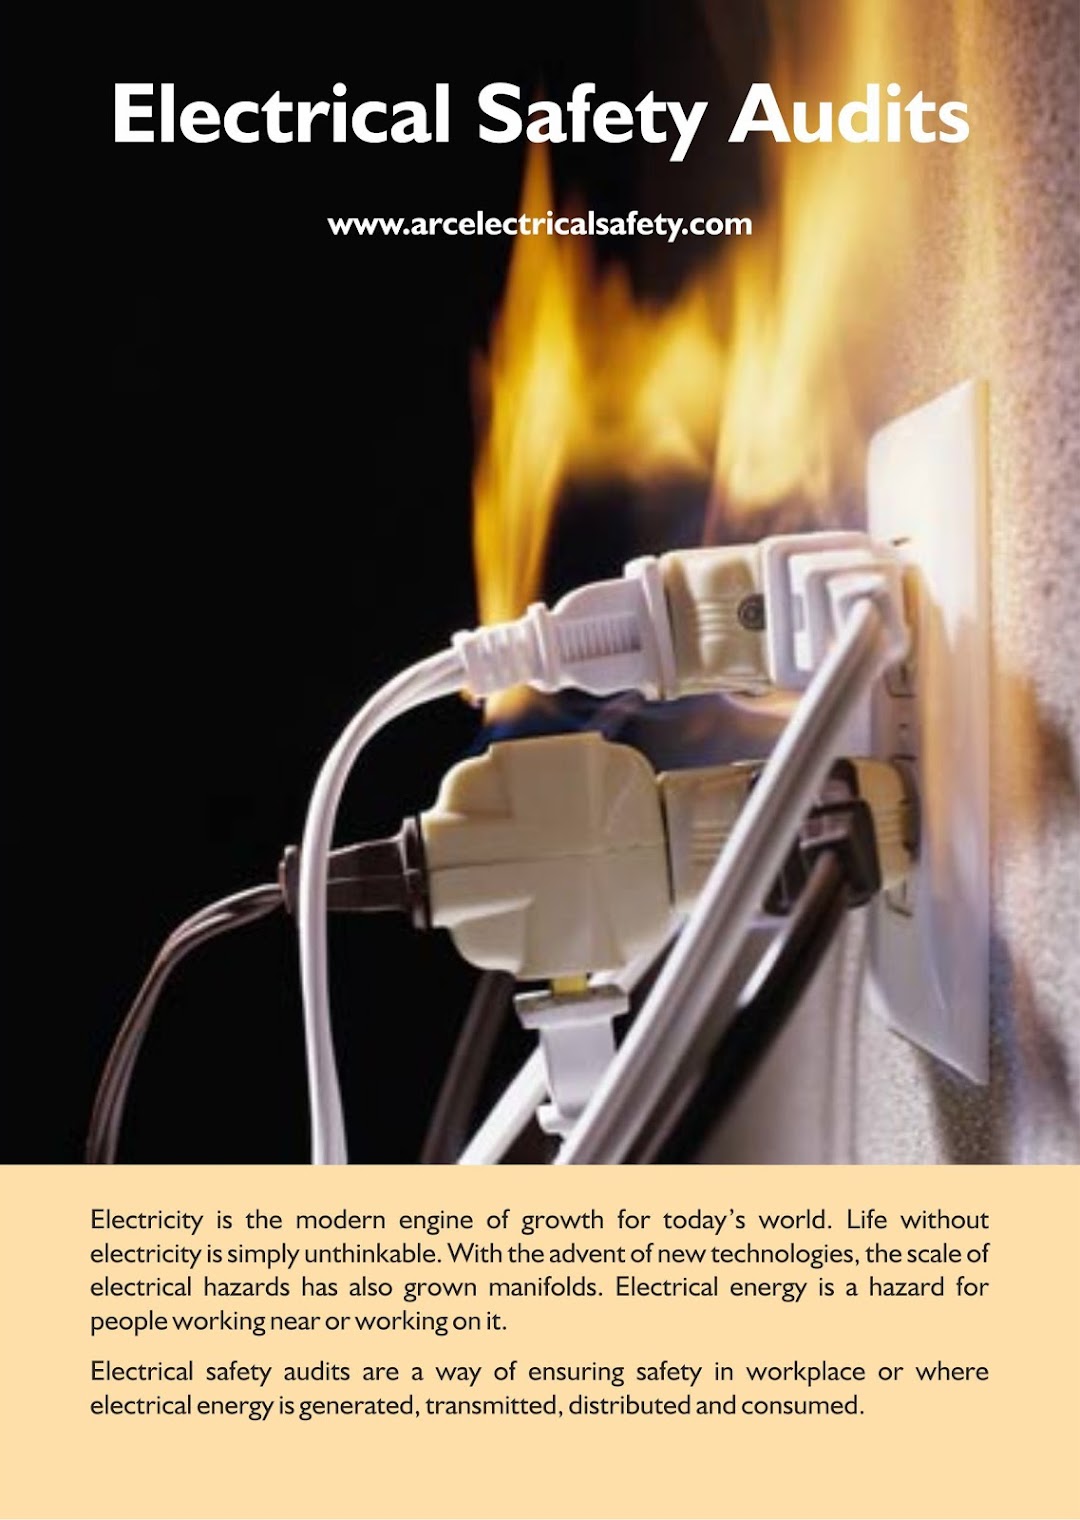 Arc electrical safety consulting